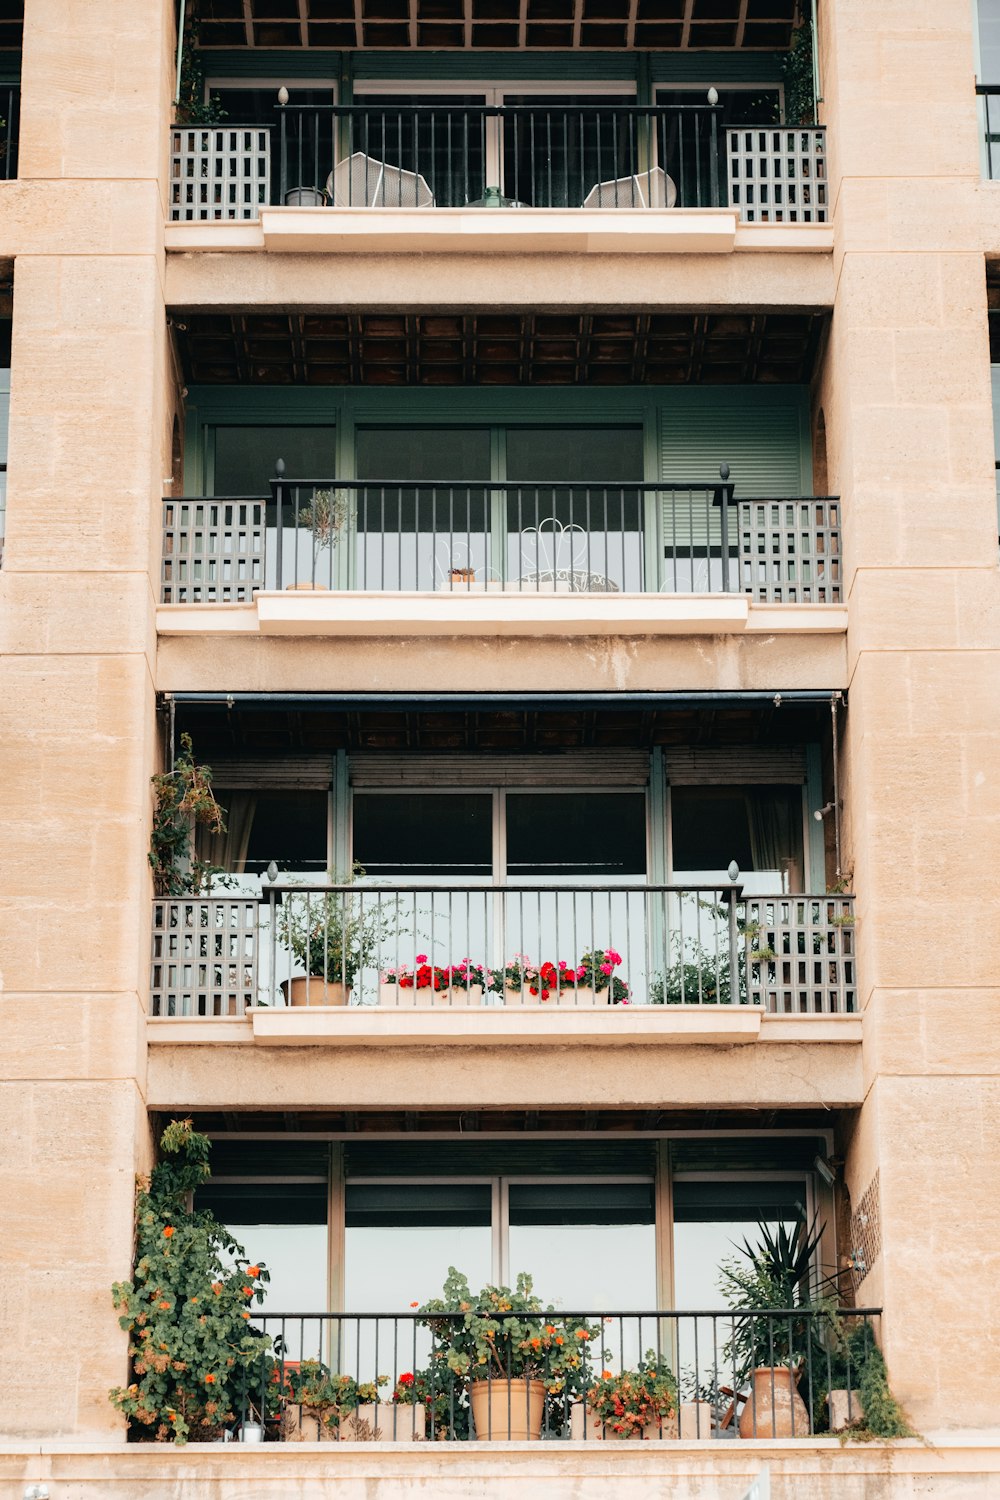 a tall building with balconies and plants on the balconies